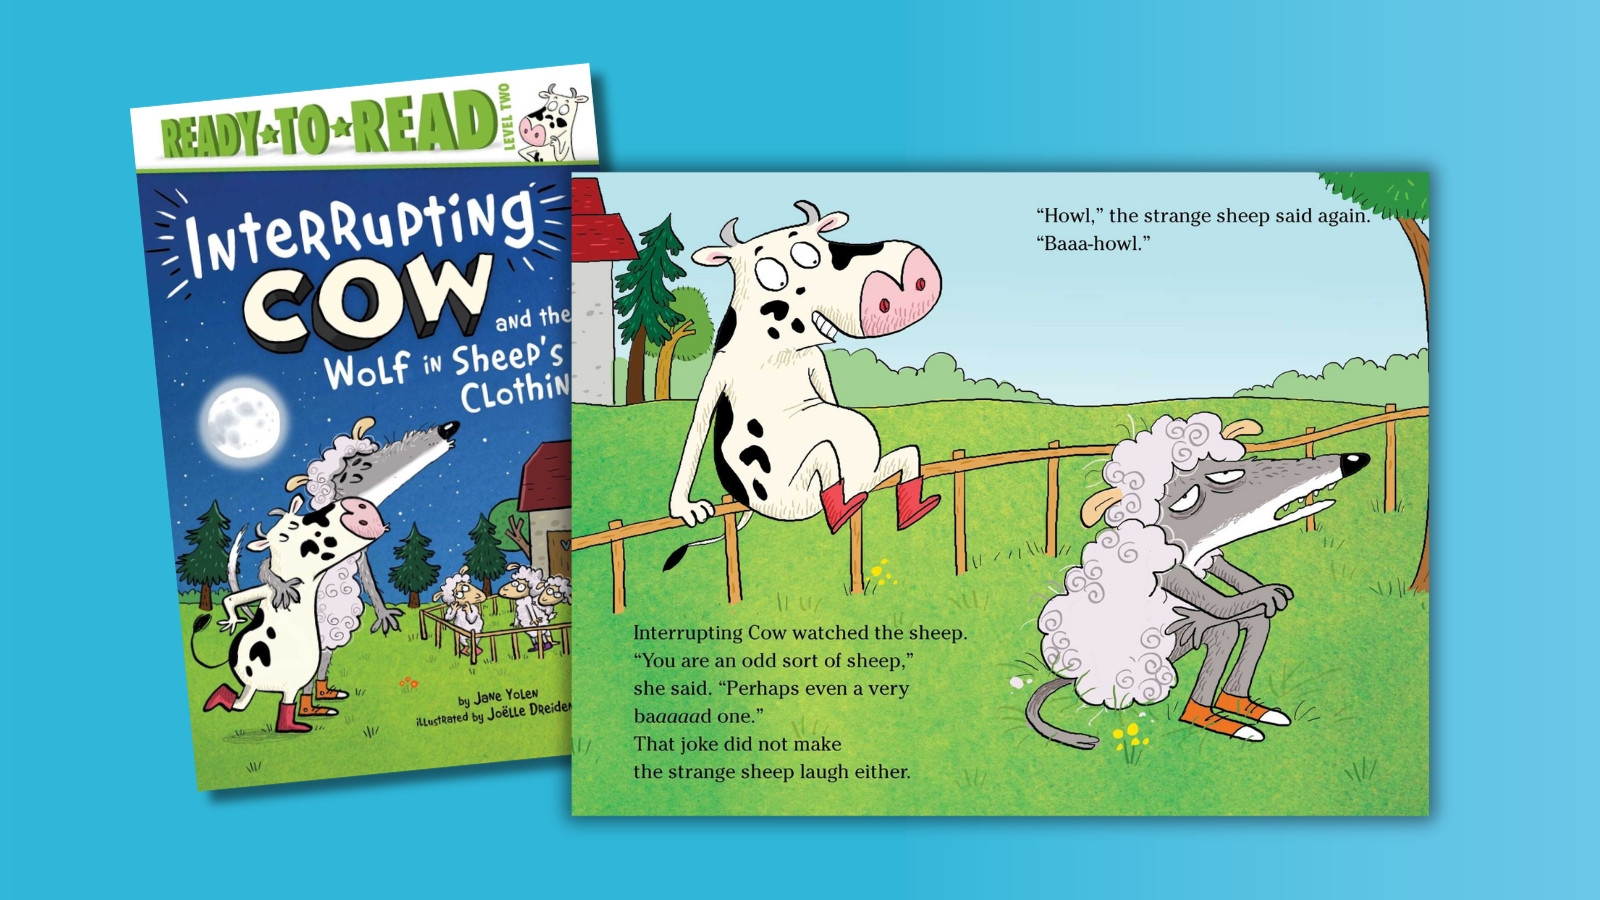 Cover and image from the Ready-to-Read book, "Interrupting Cow"